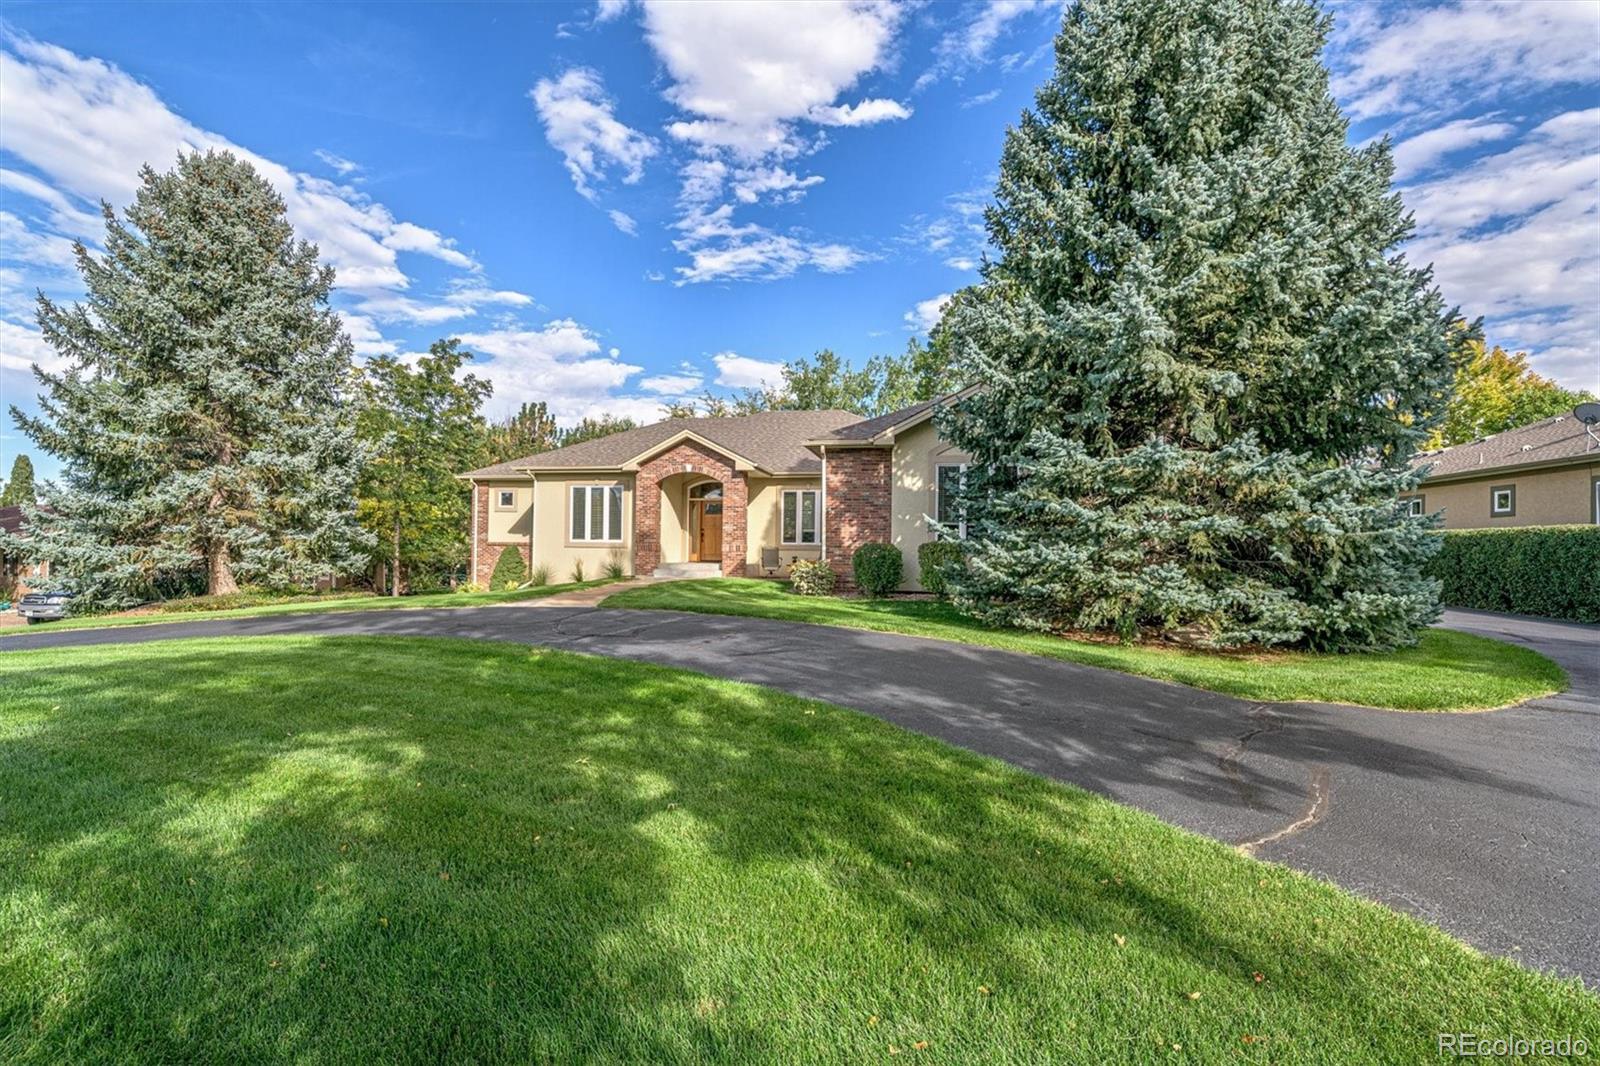 Report Image for 8  Maclean Drive,Littleton, Colorado